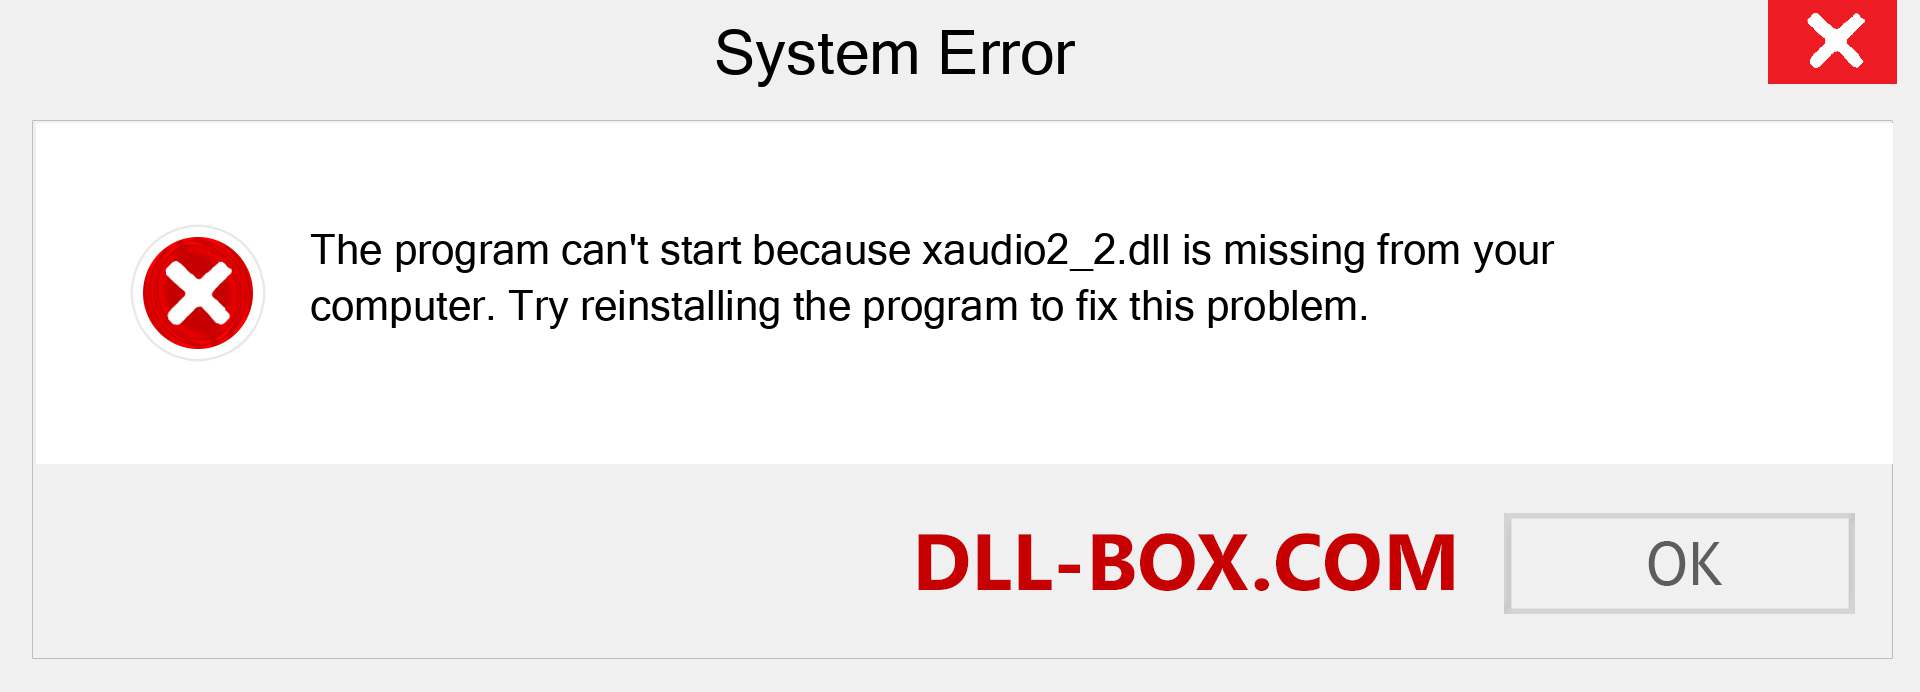  xaudio2_2.dll file is missing?. Download for Windows 7, 8, 10 - Fix  xaudio2_2 dll Missing Error on Windows, photos, images